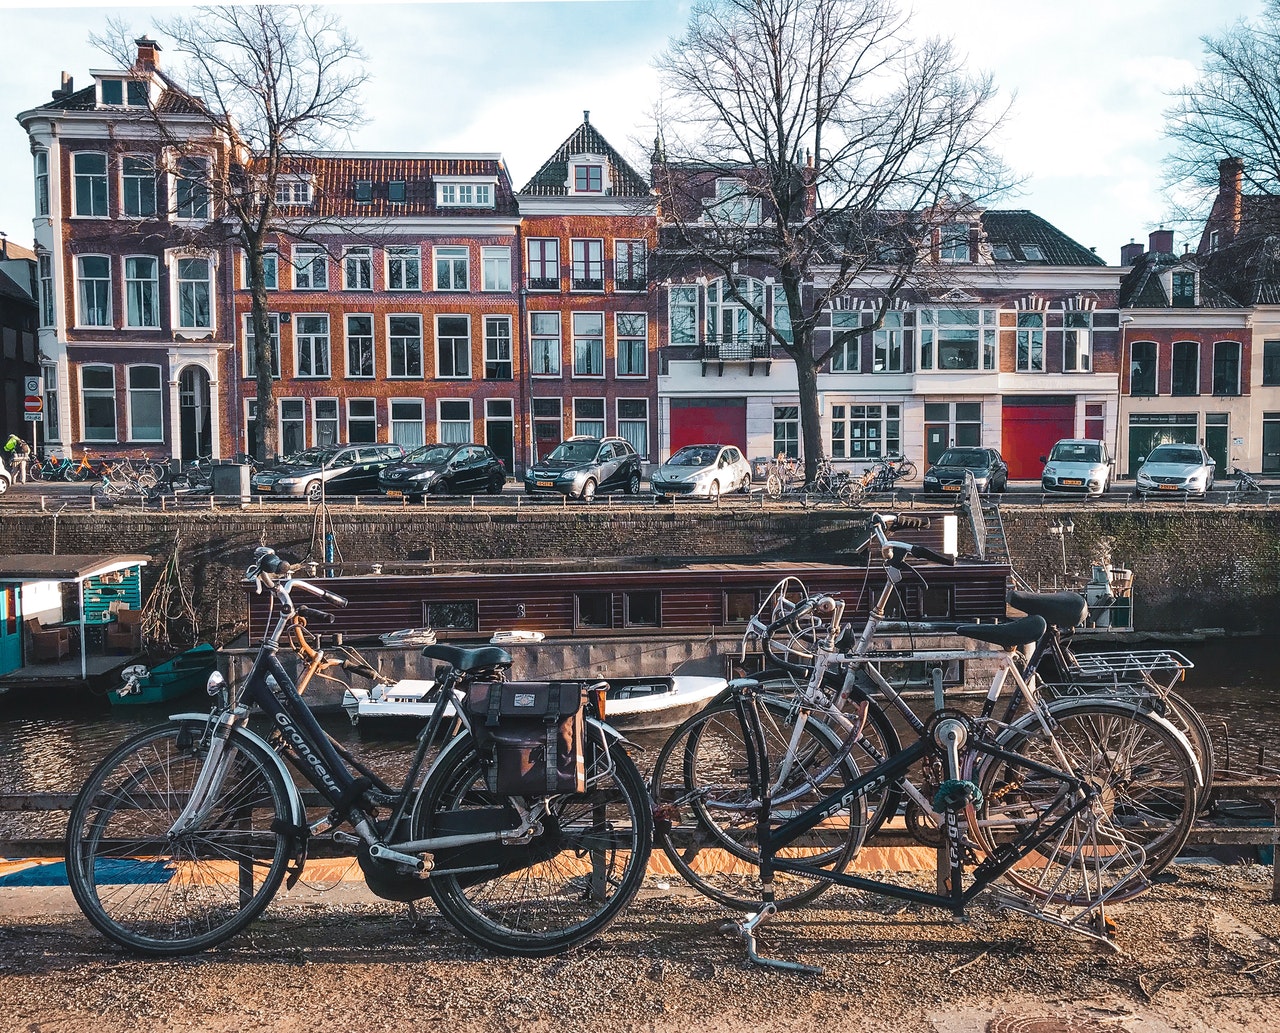 Photo by Kayla Ihrig: https://www.pexels.com/photo/bicycles-parked-beside-brown-wooden-fence-near-a-river-3424845/